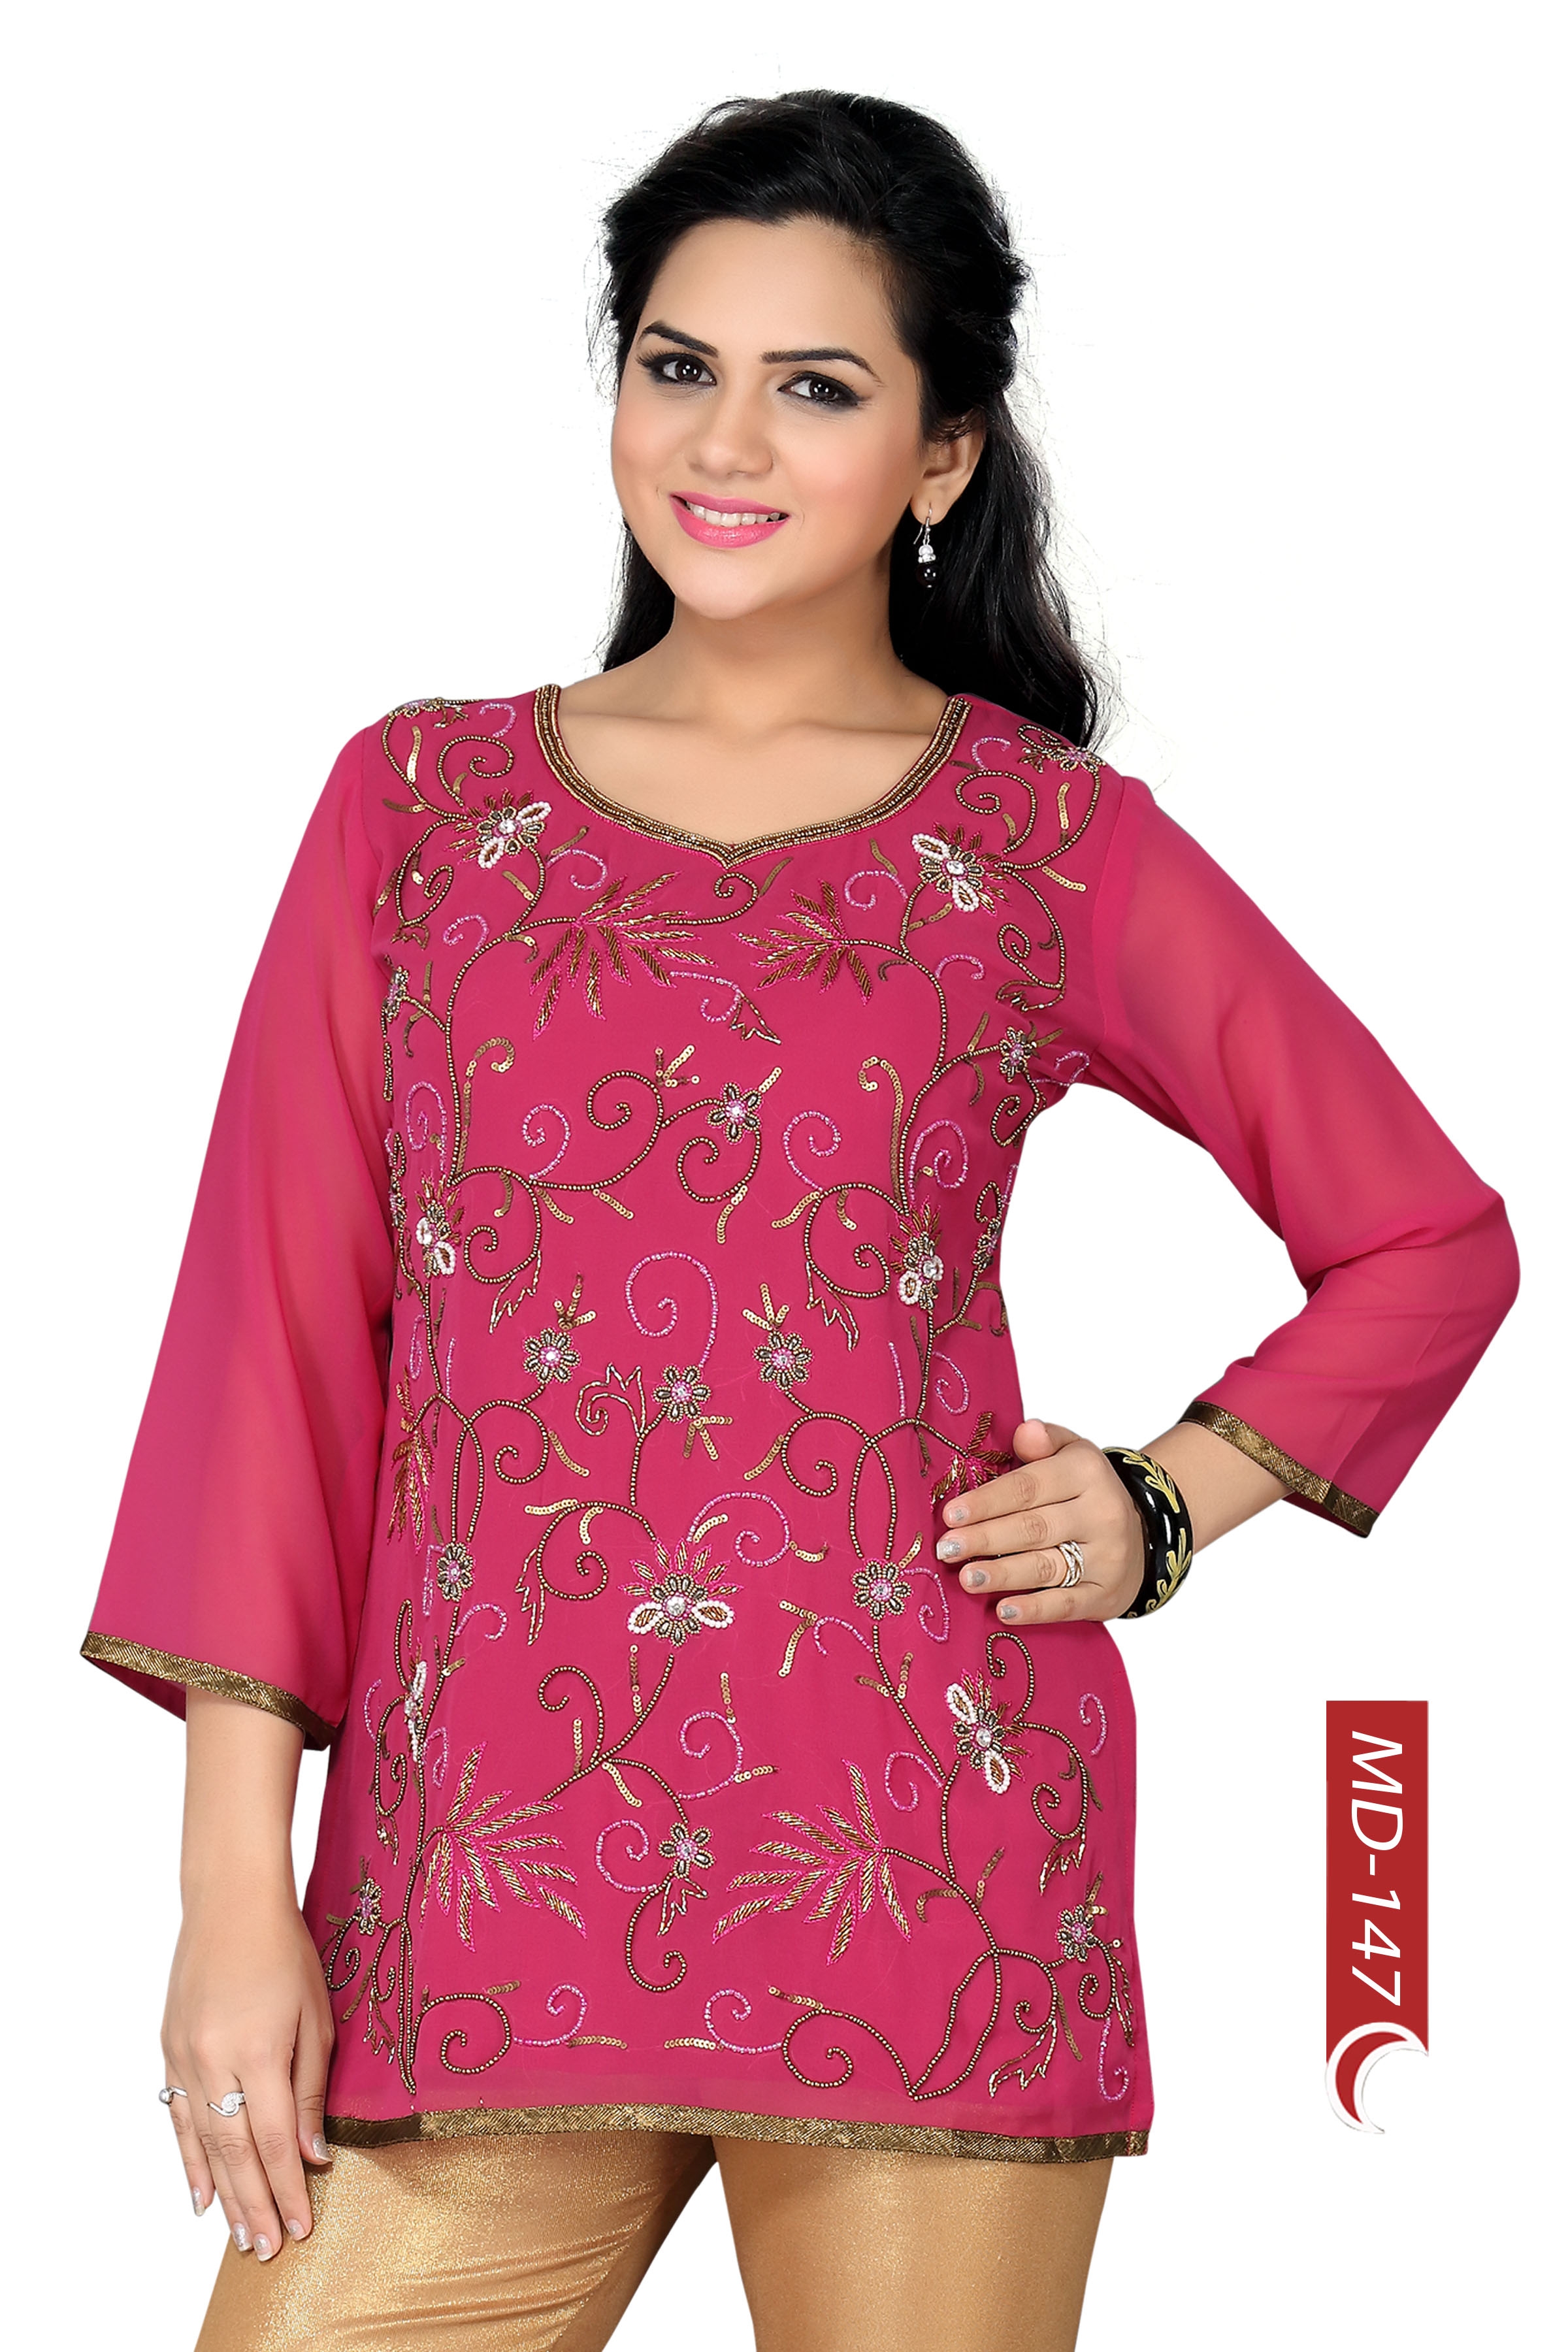 The Pricey Pink Embroidered Women Short Kurta Top